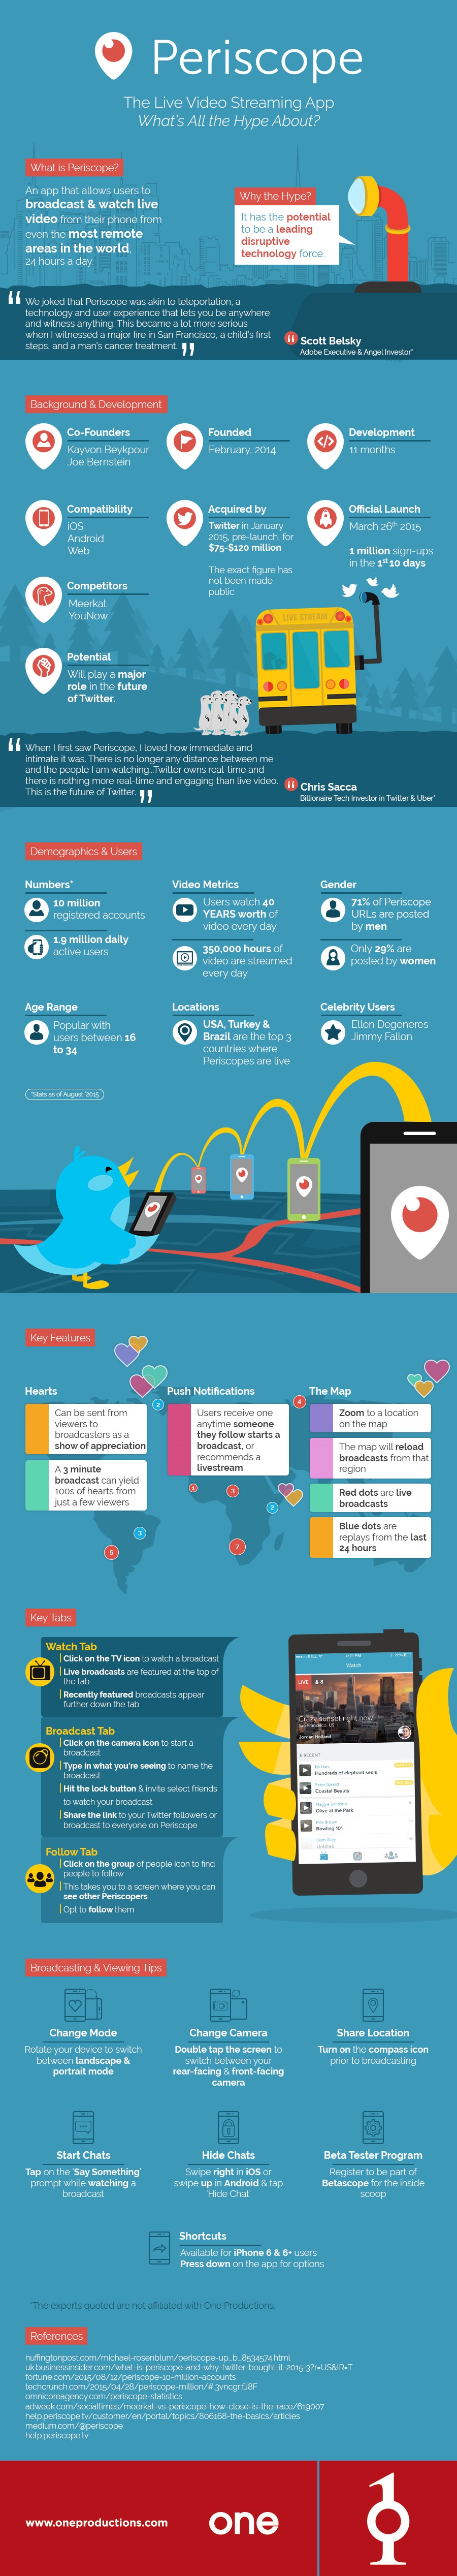 Periscope the live video streaming app Infographic